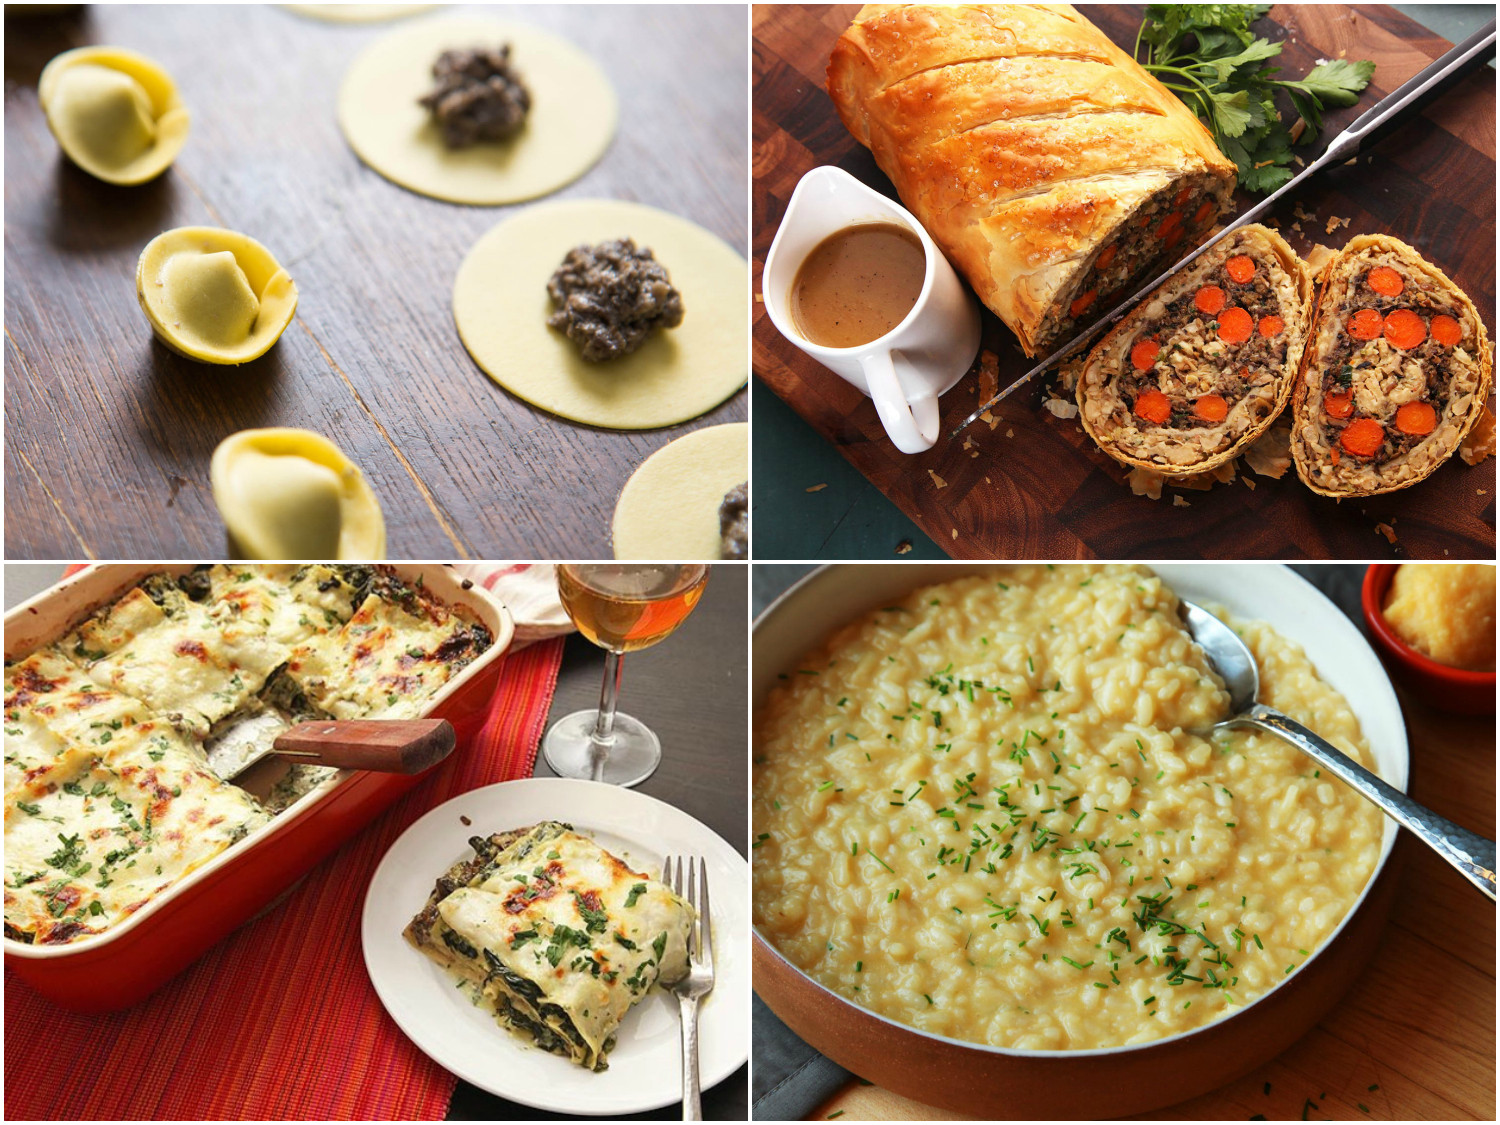 Holiday Vegetarian Main Dishes
 13 Festive Ve arian Main Dishes That Even Omnivores Will